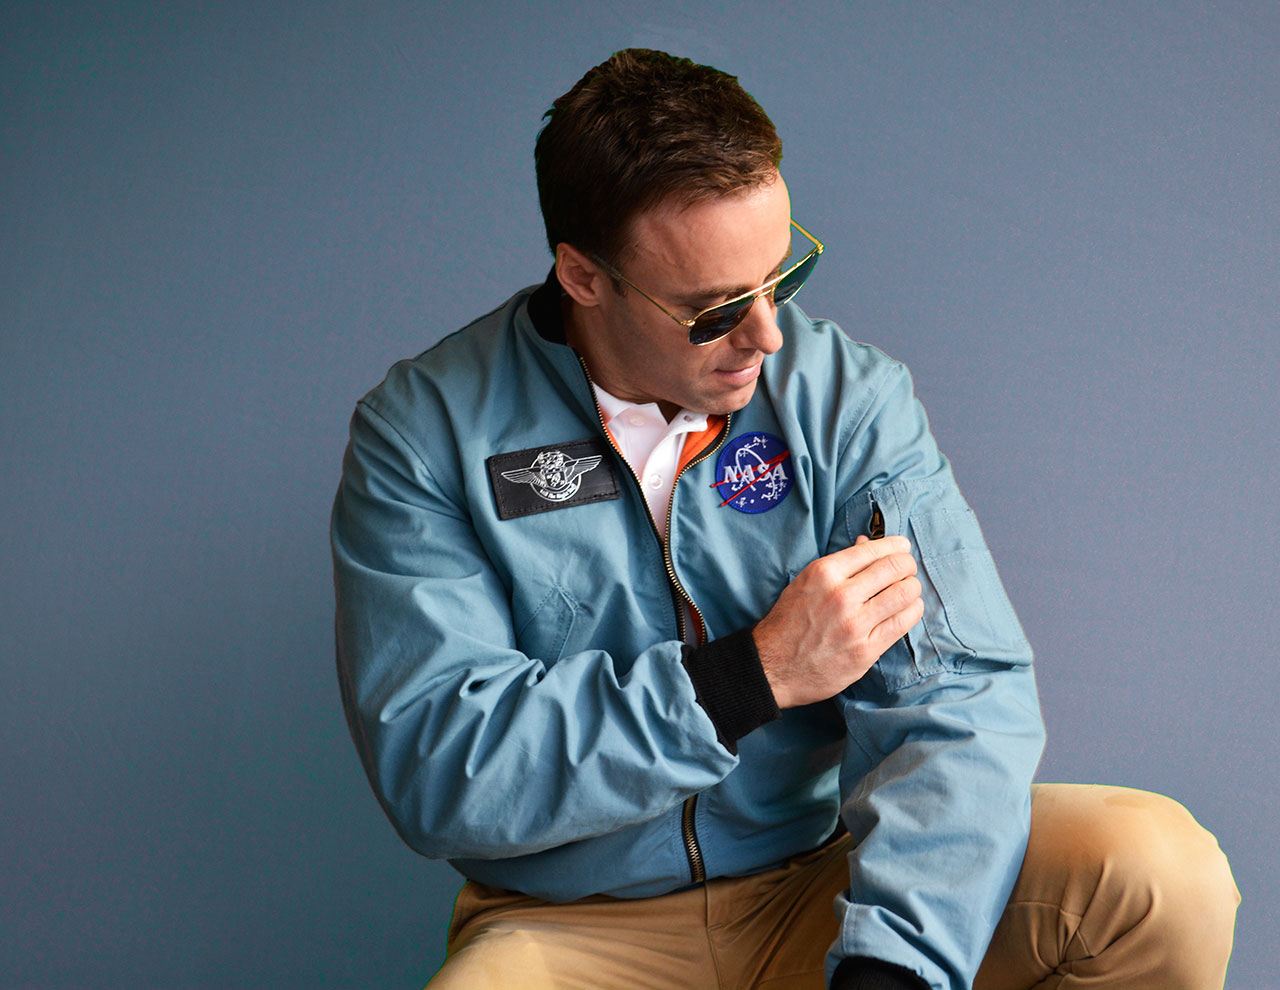 Apollo Couture Astronaut Offers Replica Of Iconic Nasa Flight Jacket Space